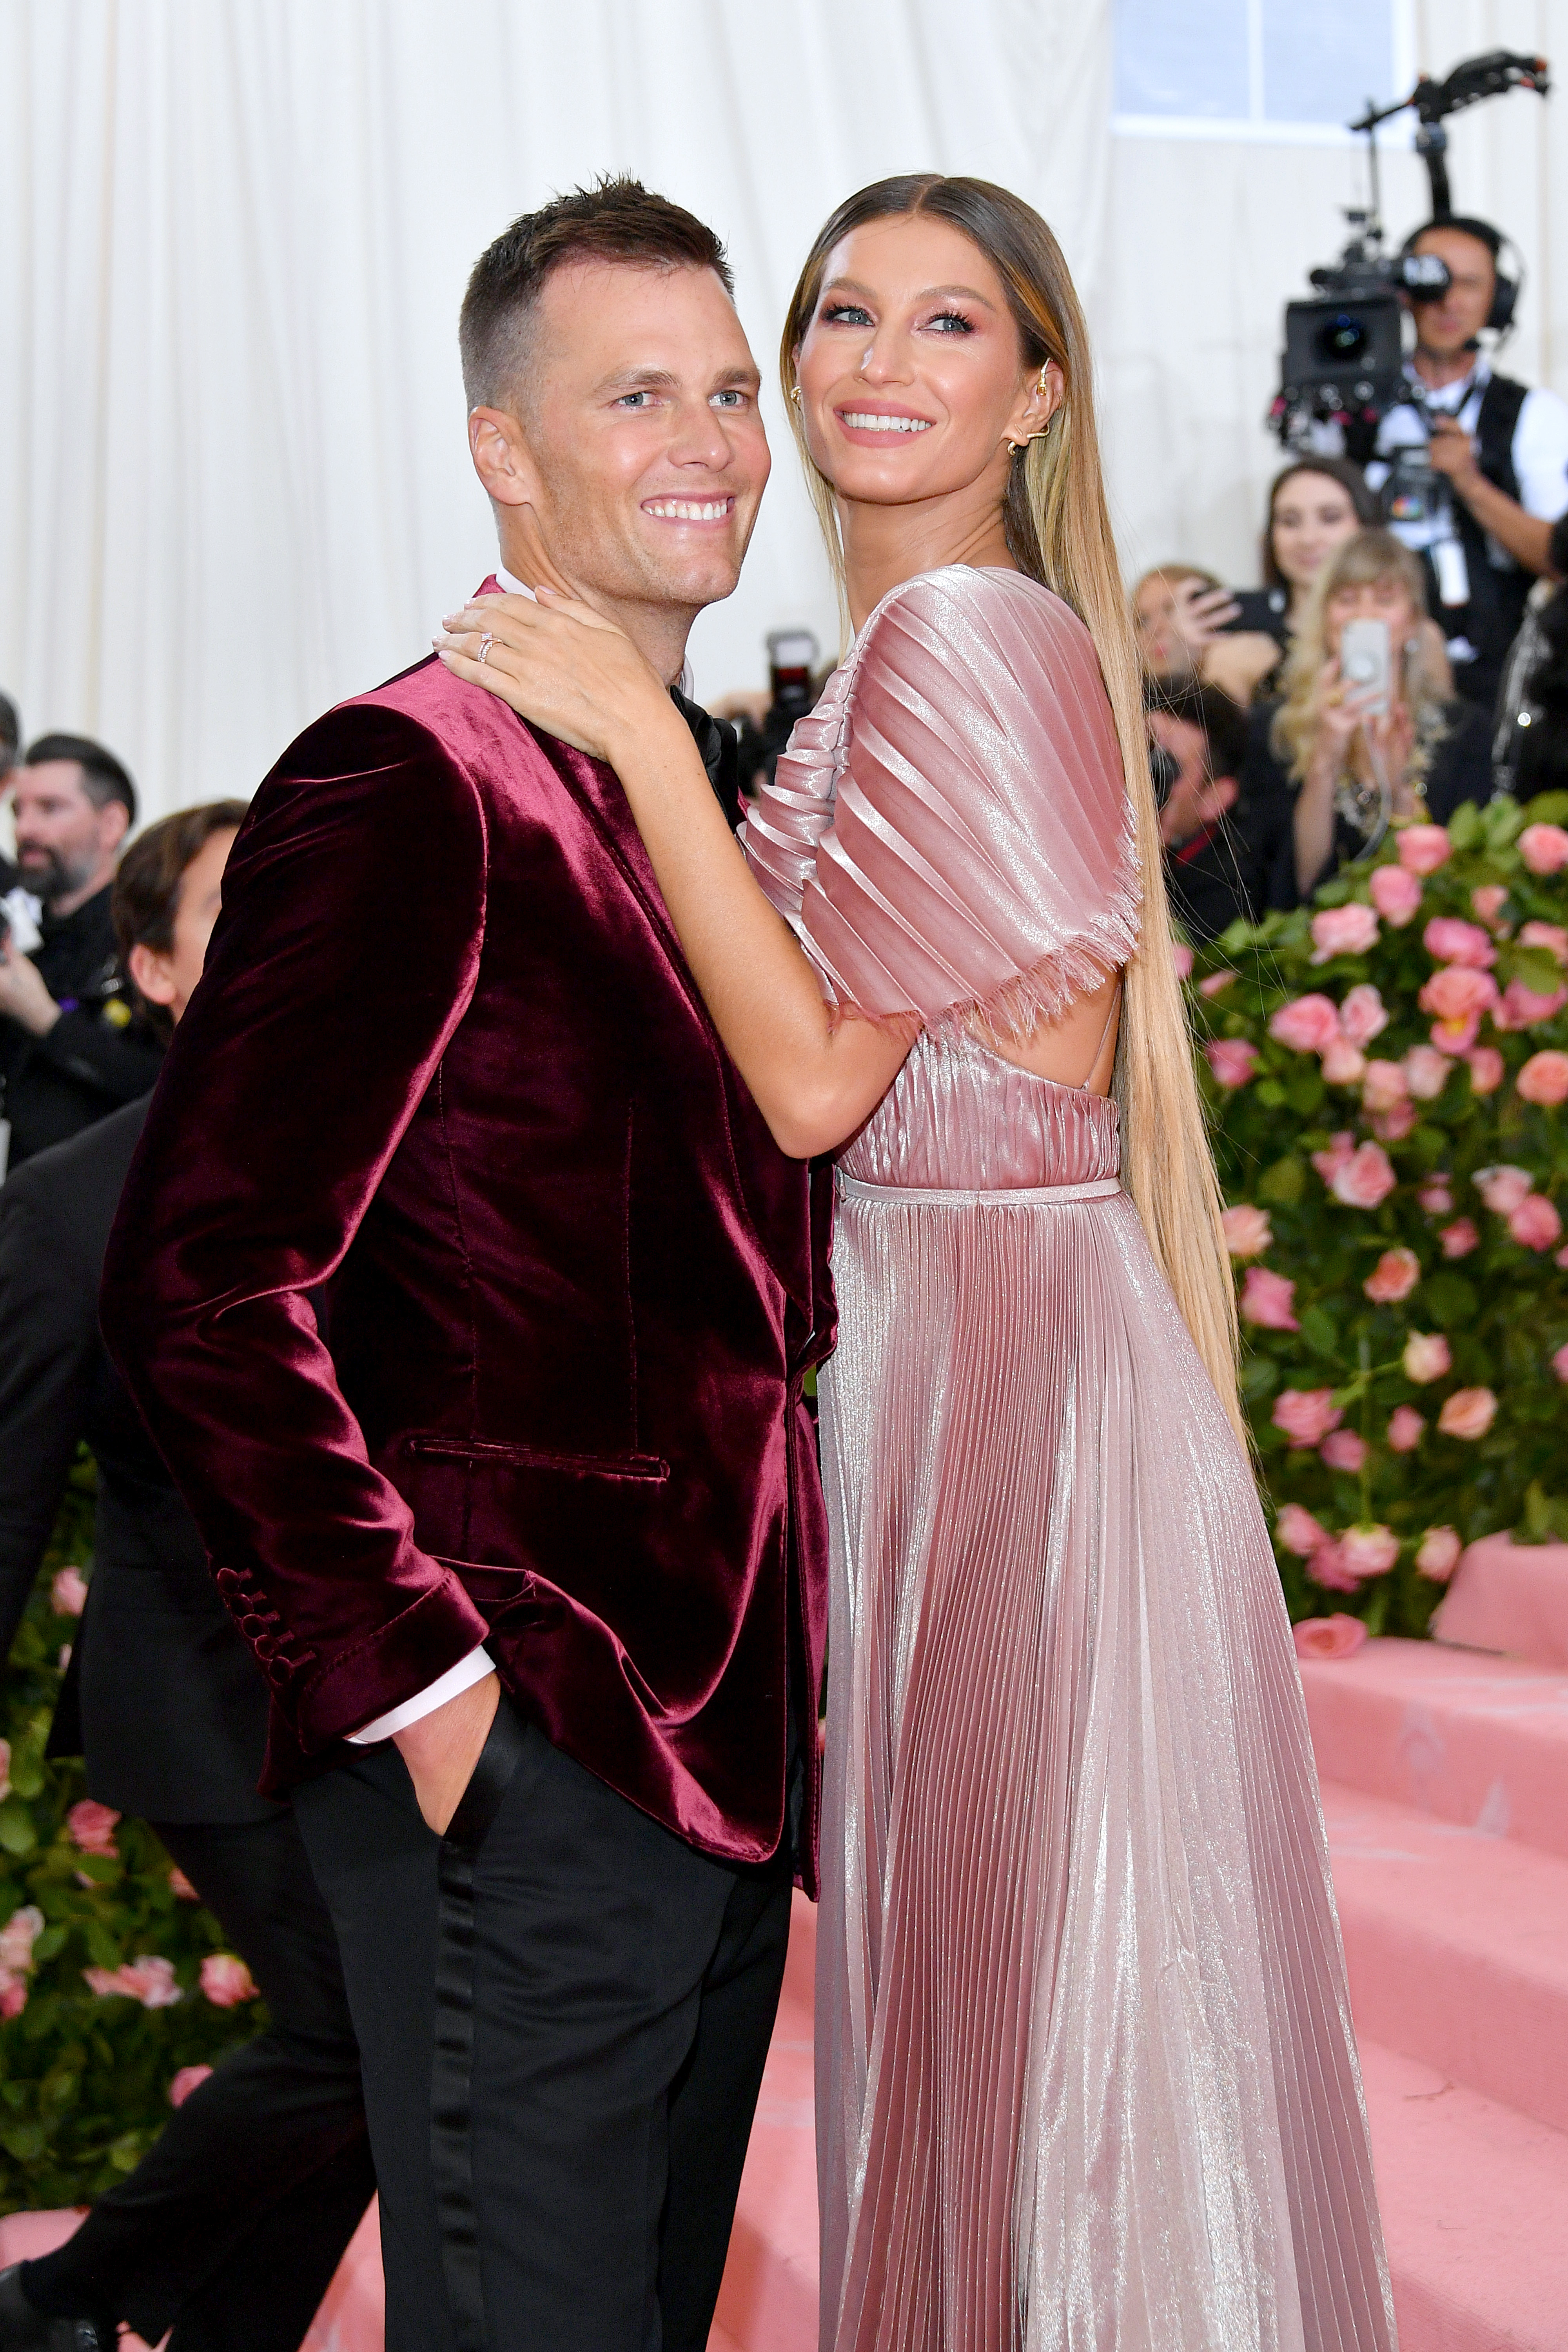 Tom Brady and Gisele Bündchen attend The 2019 Met Gala Celebrating Camp: Notes on Fashion at Metropolitan Museum of Art on May 06, 2019 in New York City | Source: Getty Images